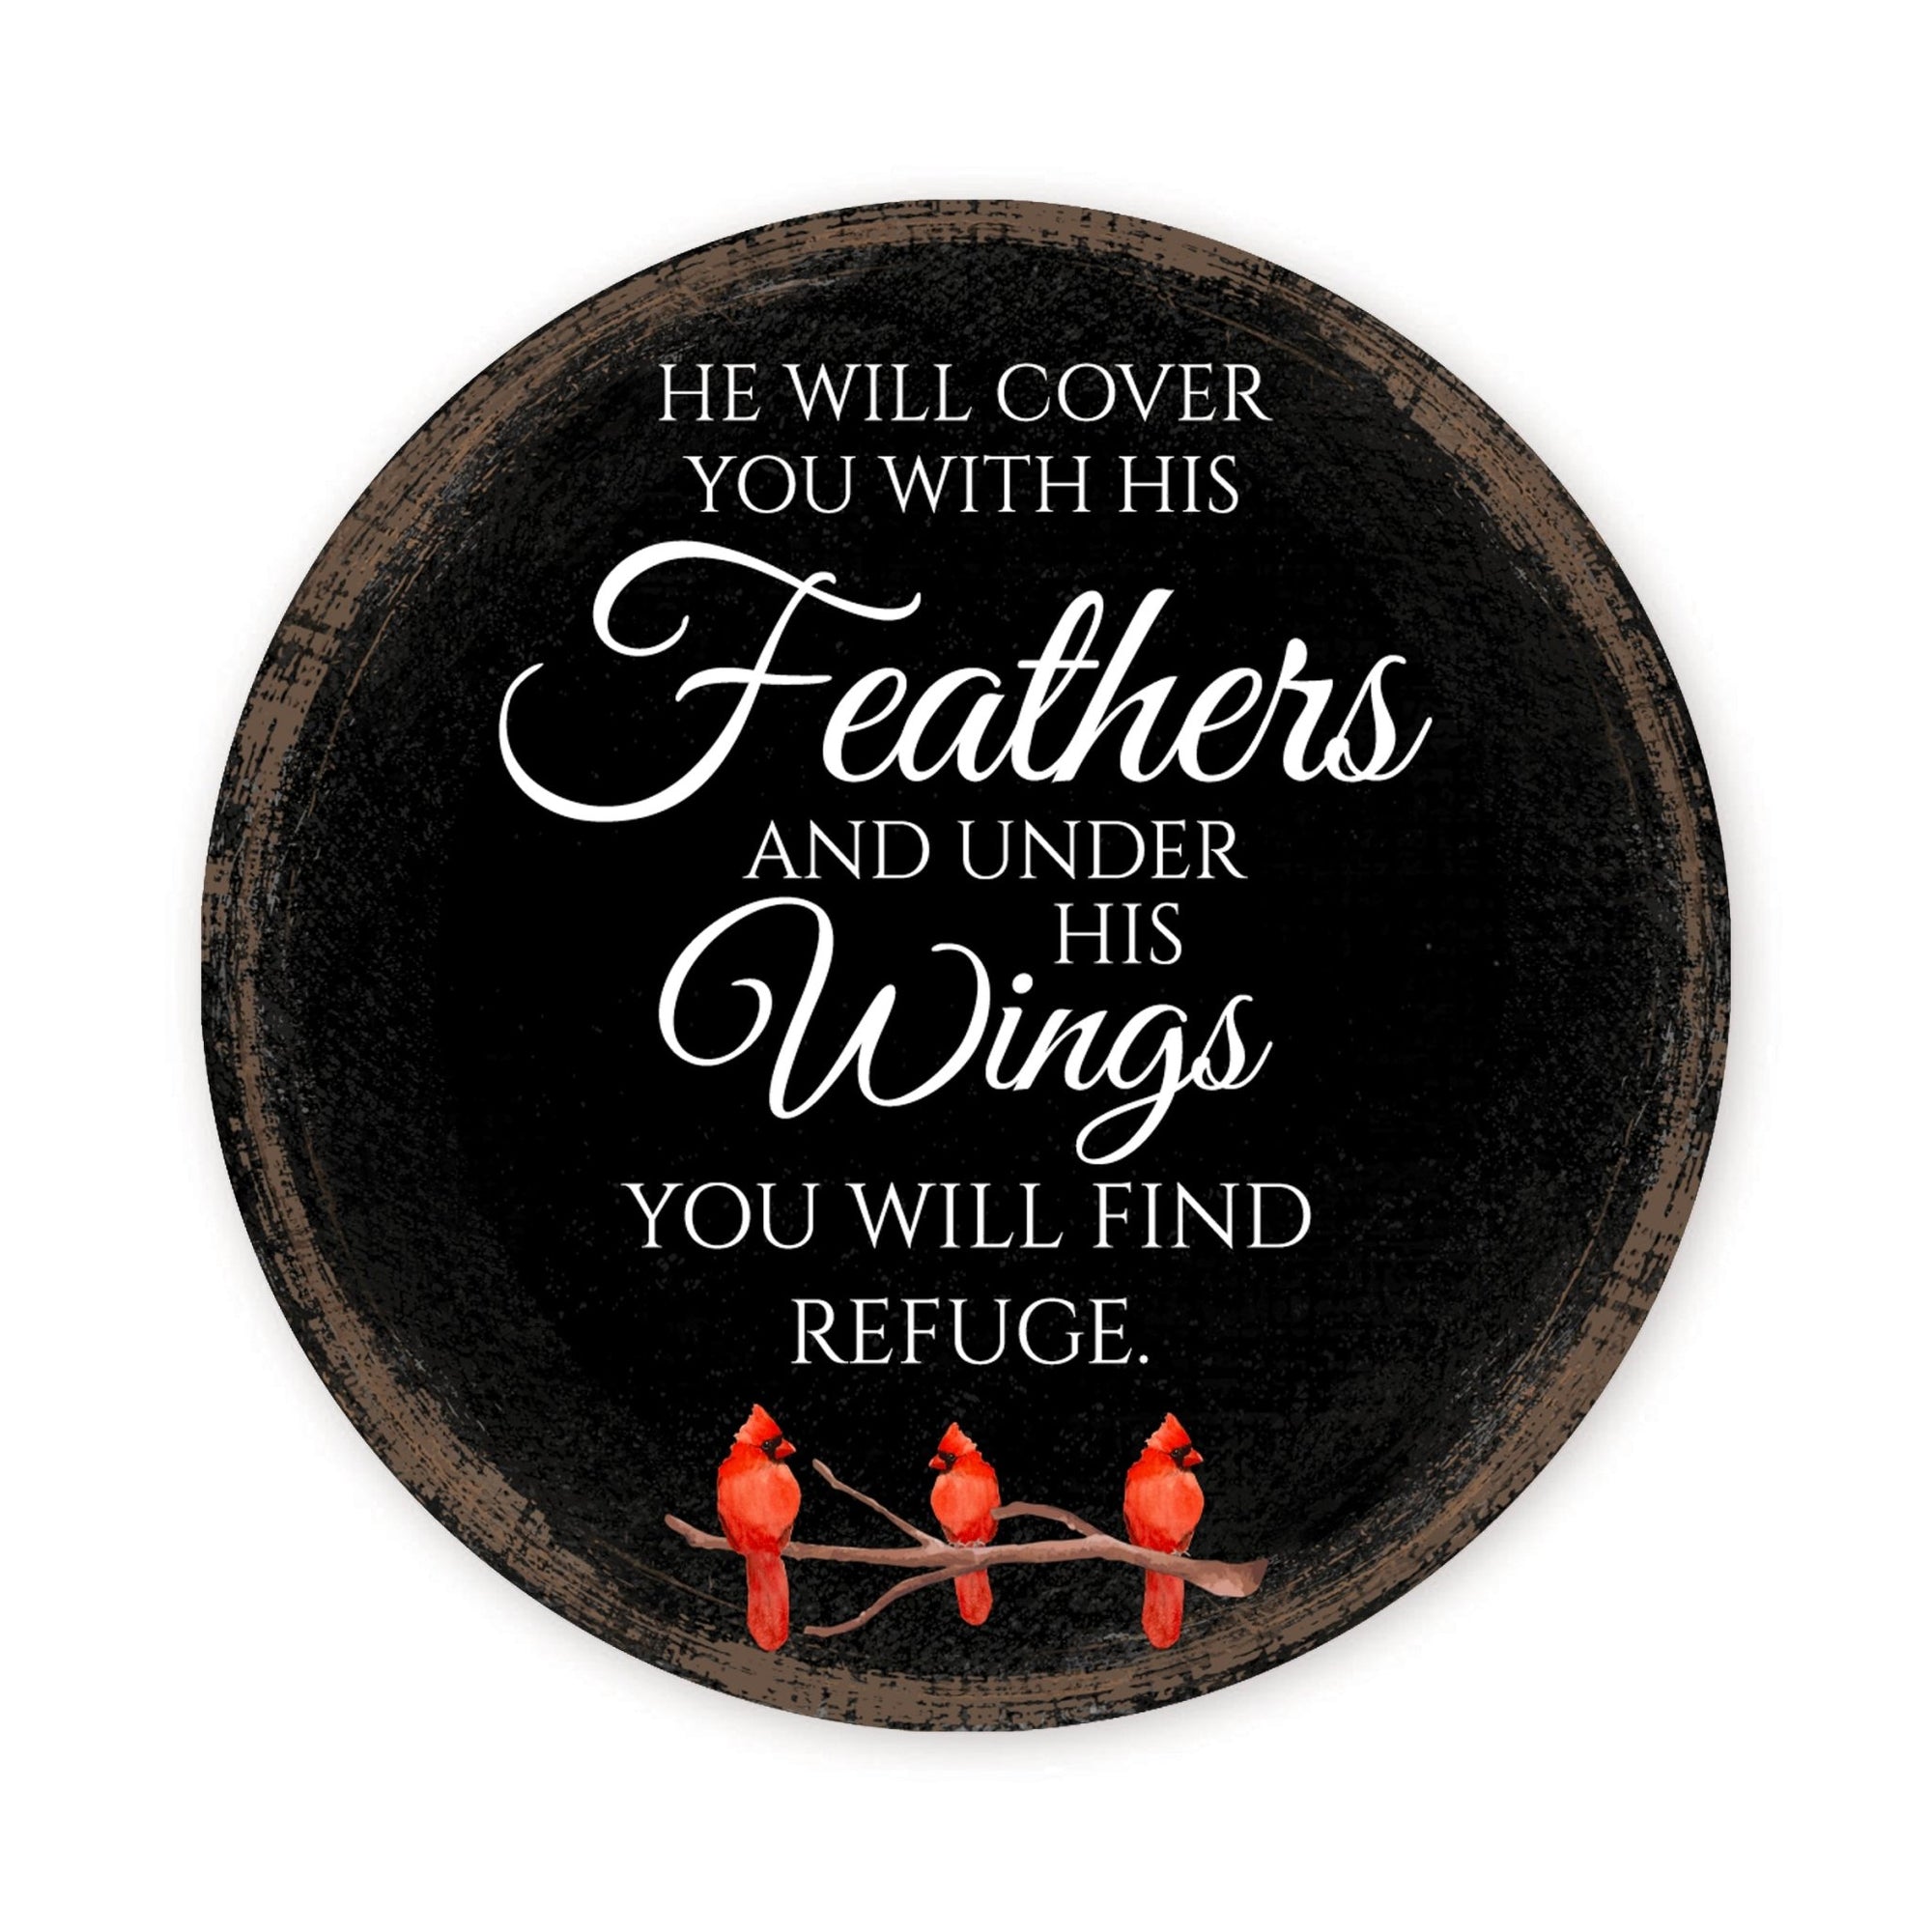 Vintage-Inspired Cardinal Wooden Magnet Printed With Everyday Inspirational Verses Gift Ideas - He Will Cover - LifeSong Milestones